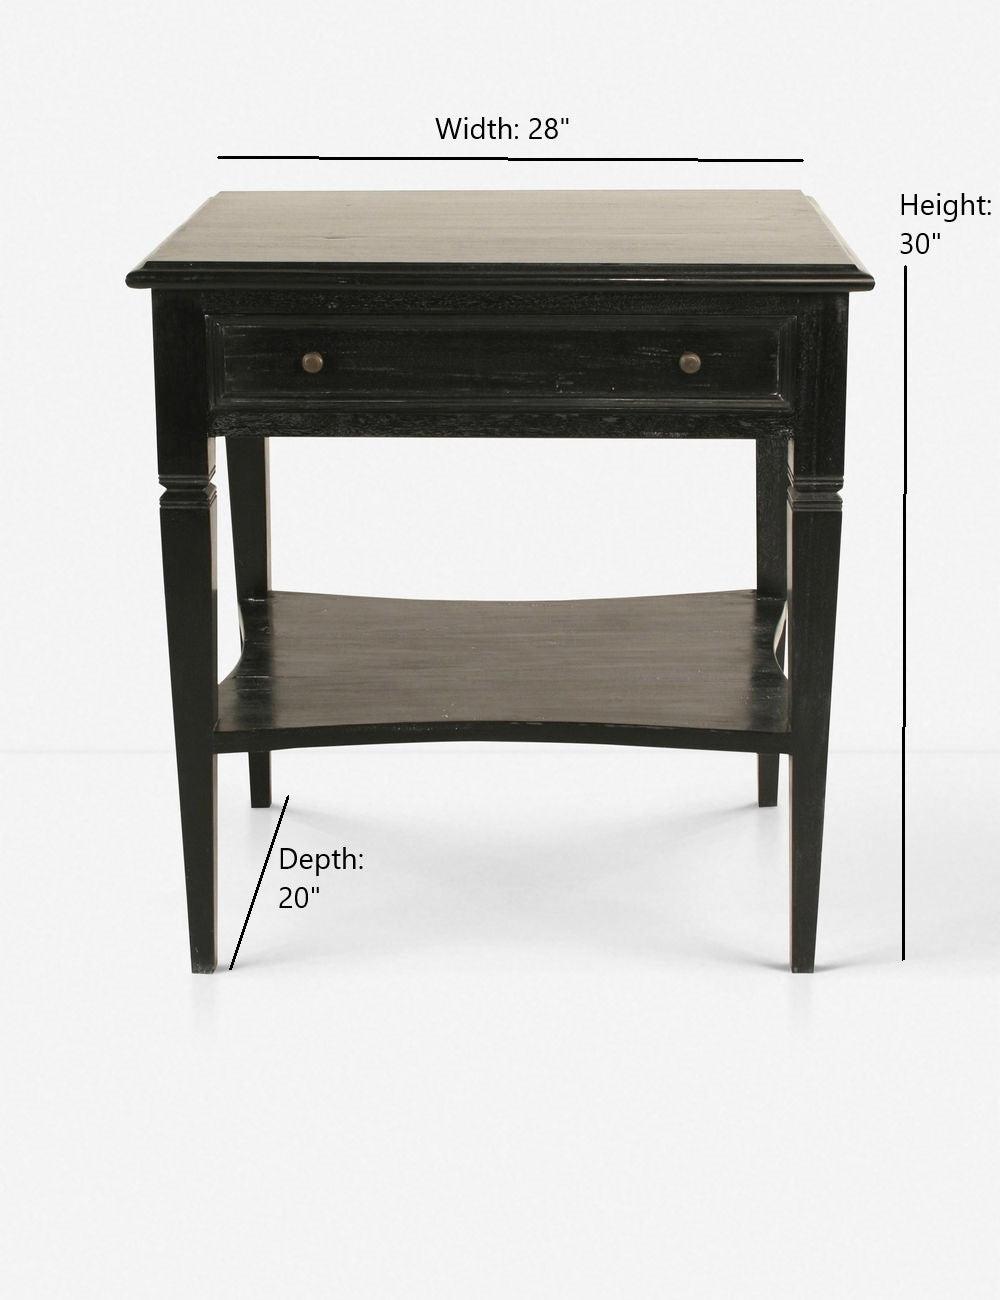 Oxford 20" Solid Mahogany Wood End Table with Storage - Hand Rubbed Black